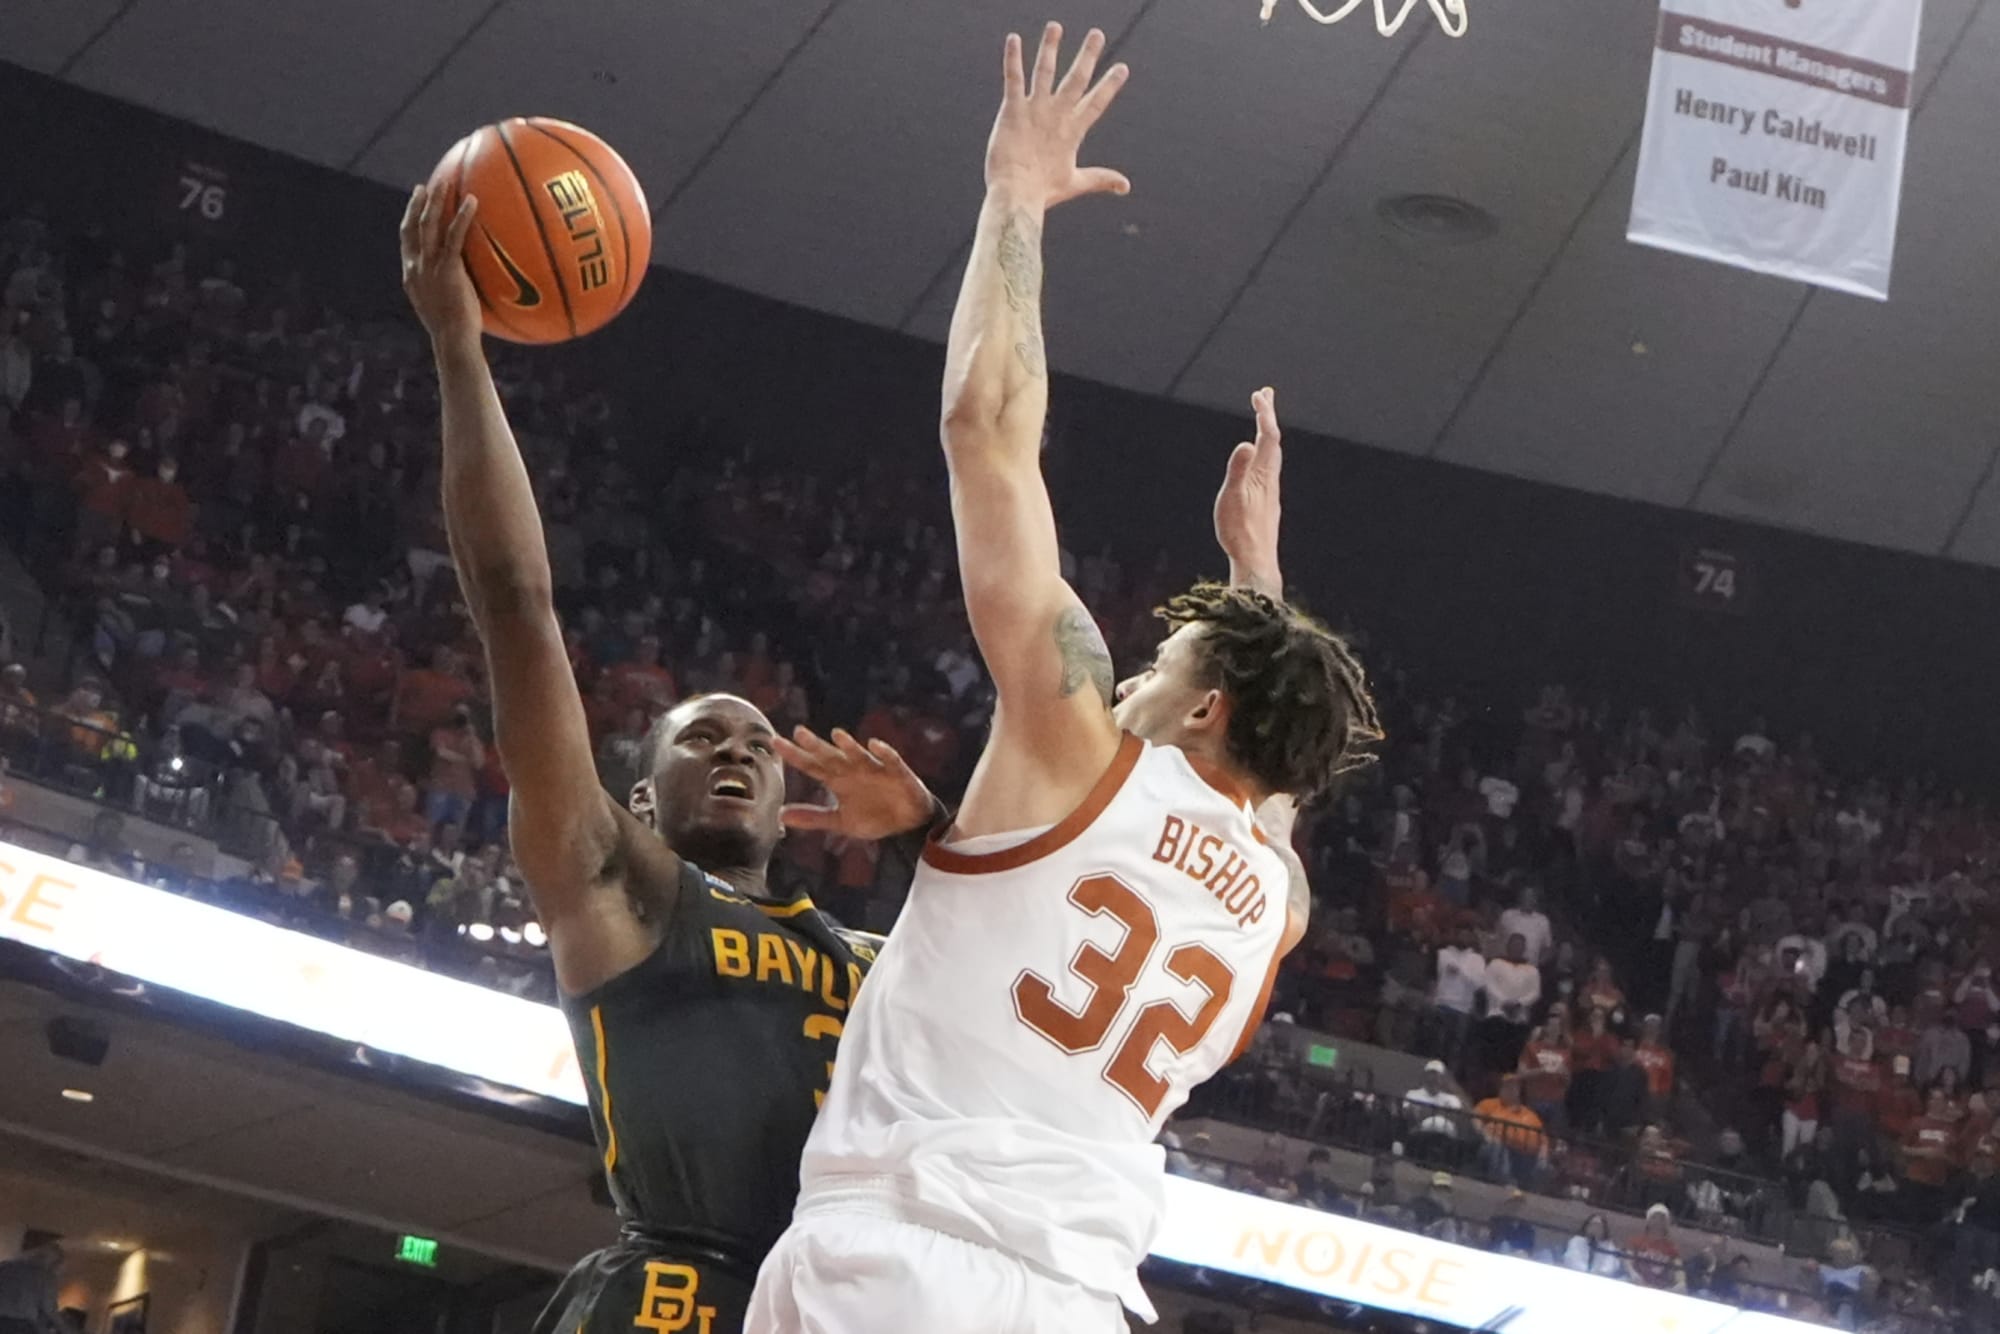  Texas basketball misses an opportunity in loss to Baylor 